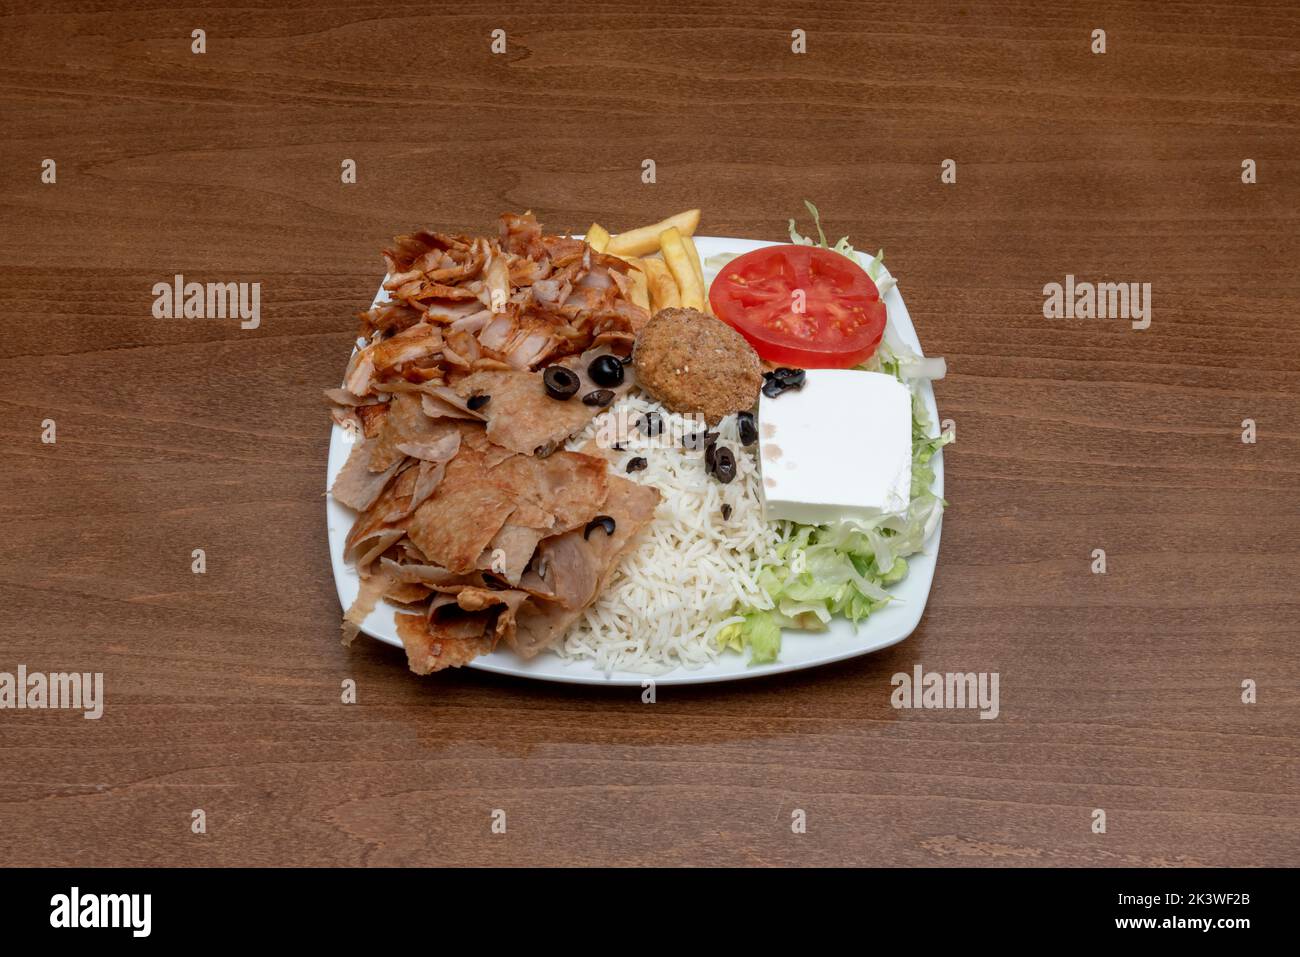 Typical mixed plate of Pakistani restaurants in Europe with lamb and chicken kebab meat, falafel medallion, black olives with French fries, white rice Stock Photo